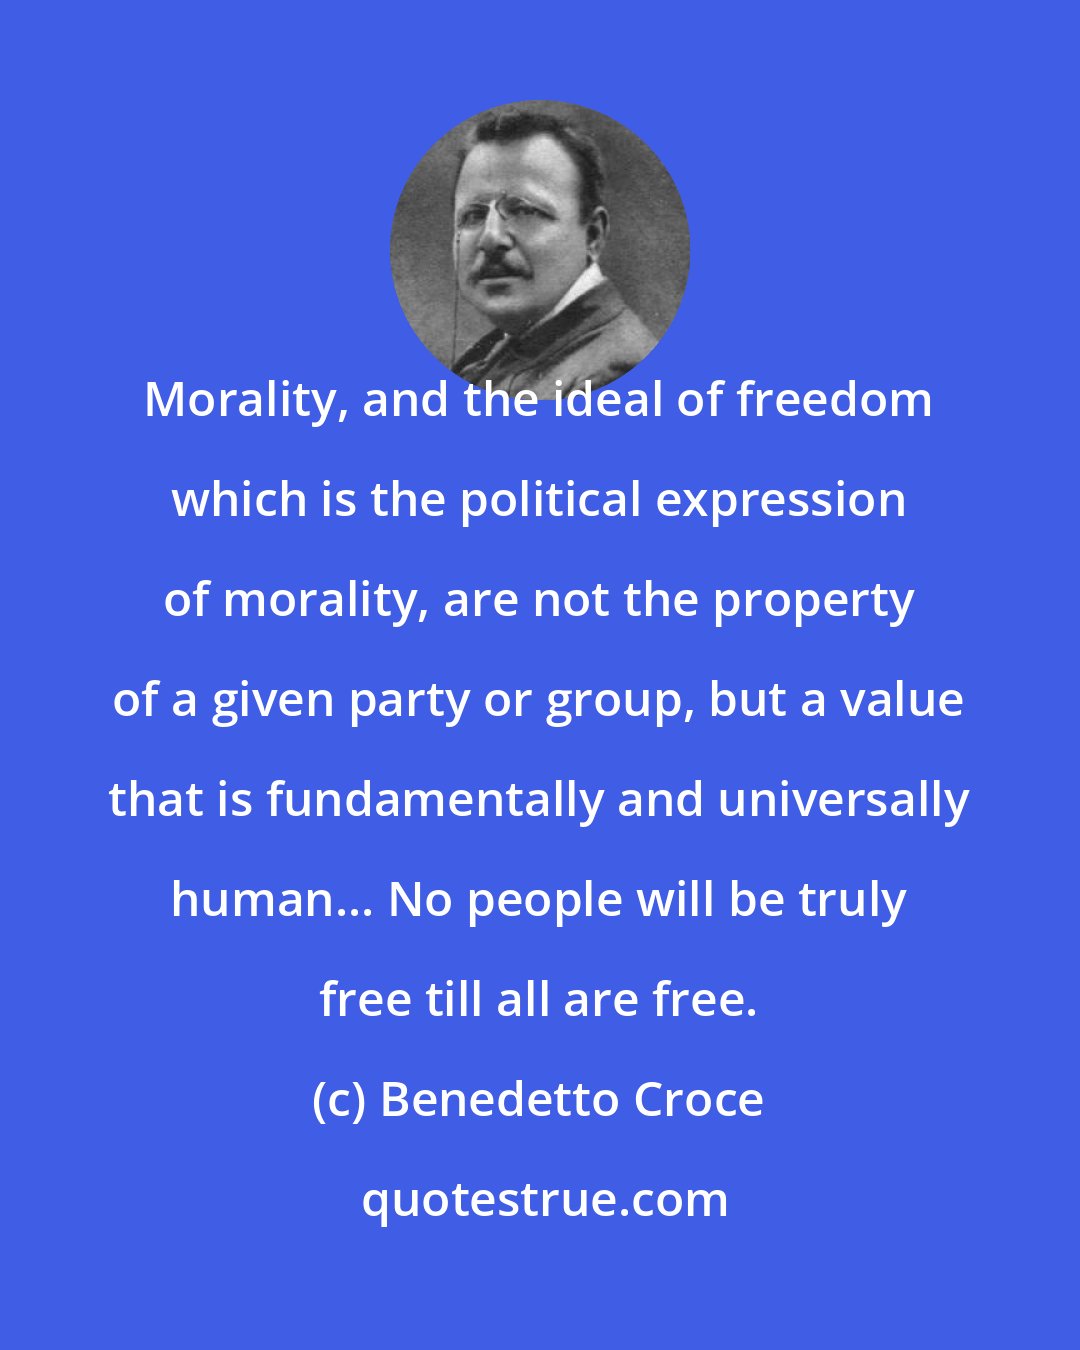 Benedetto Croce: Morality, and the ideal of freedom which is the political expression of morality, are not the property of a given party or group, but a value that is fundamentally and universally human... No people will be truly free till all are free.